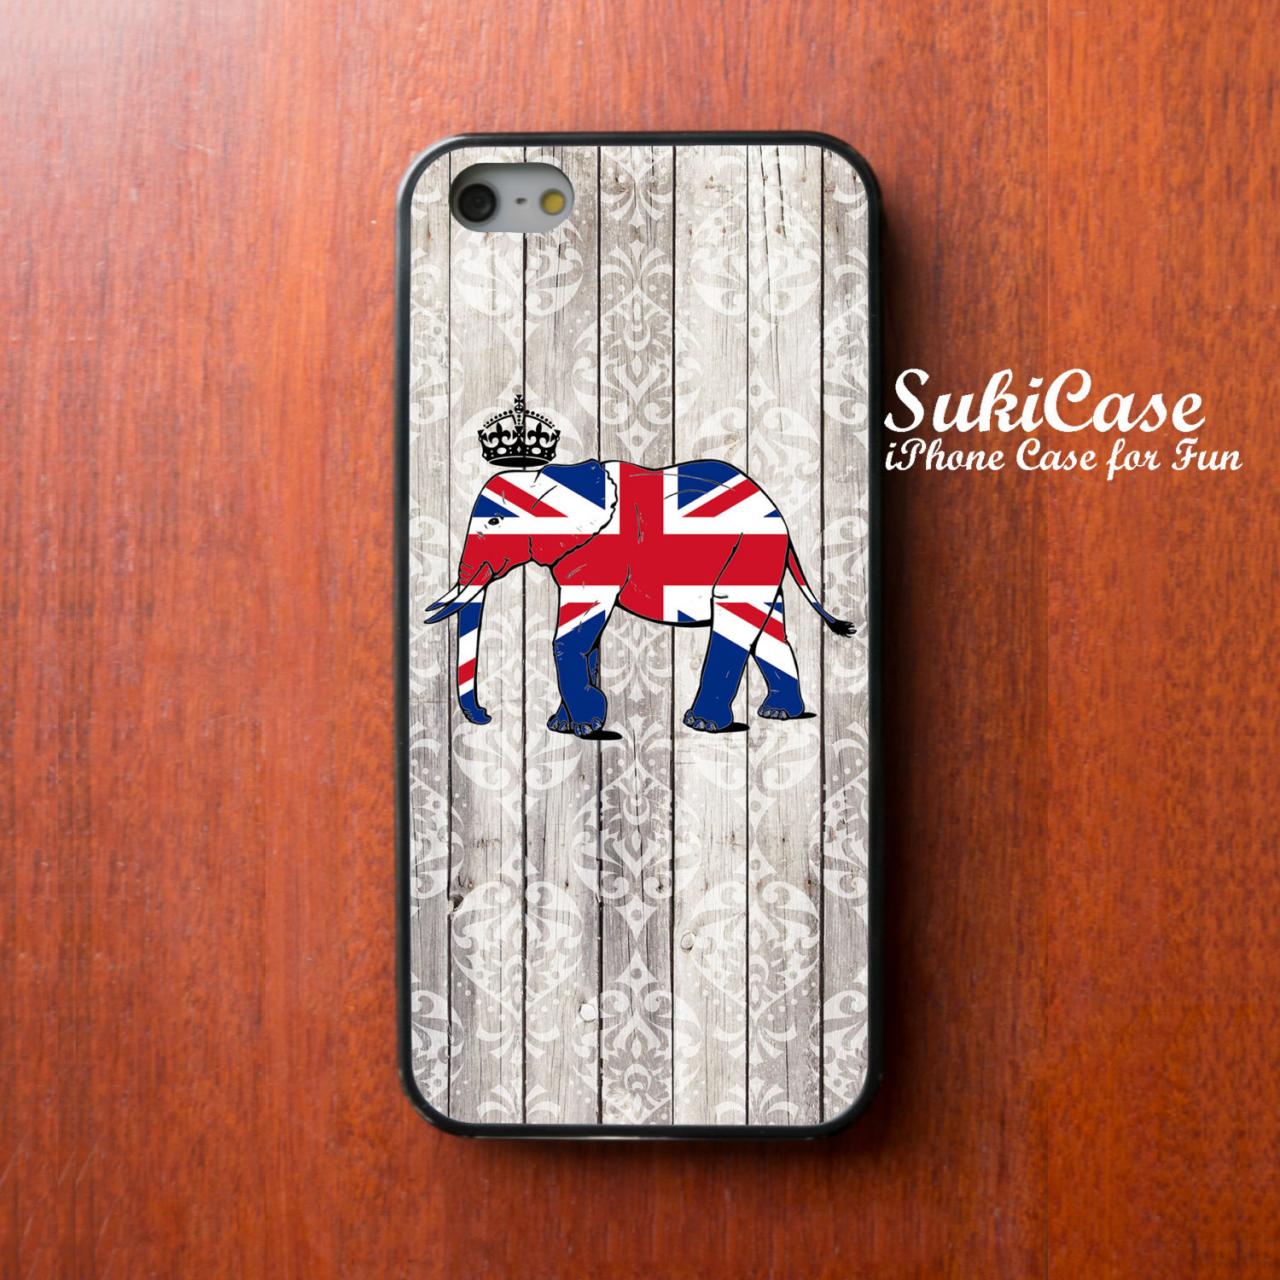 Iphone 5s Case British Elephant On Vintage Wood Pattern Iphone Case Iphone 5 Case Samsung Galaxy S4 S3 Cover Iphone 5c Iphone 4s Iphone 4